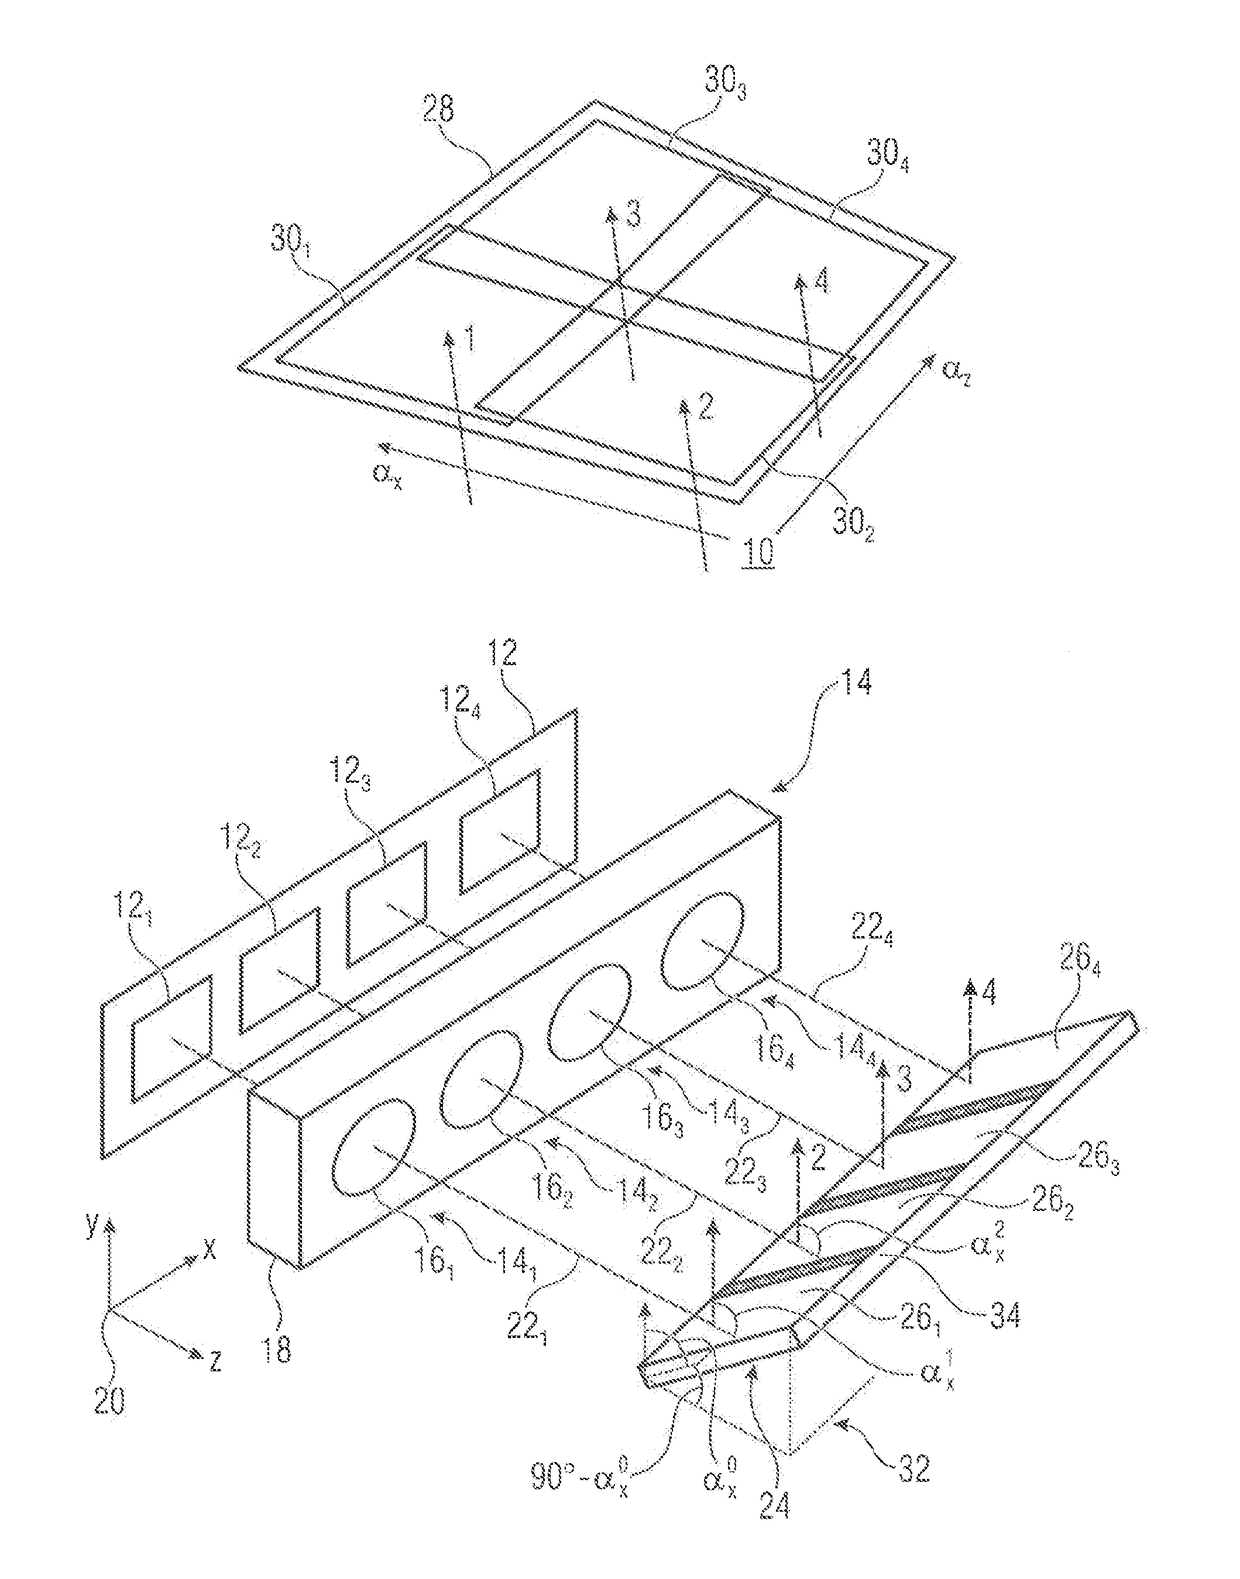 Multi-aperture imaging device having a beam-deflecting device comprising reflecting facets